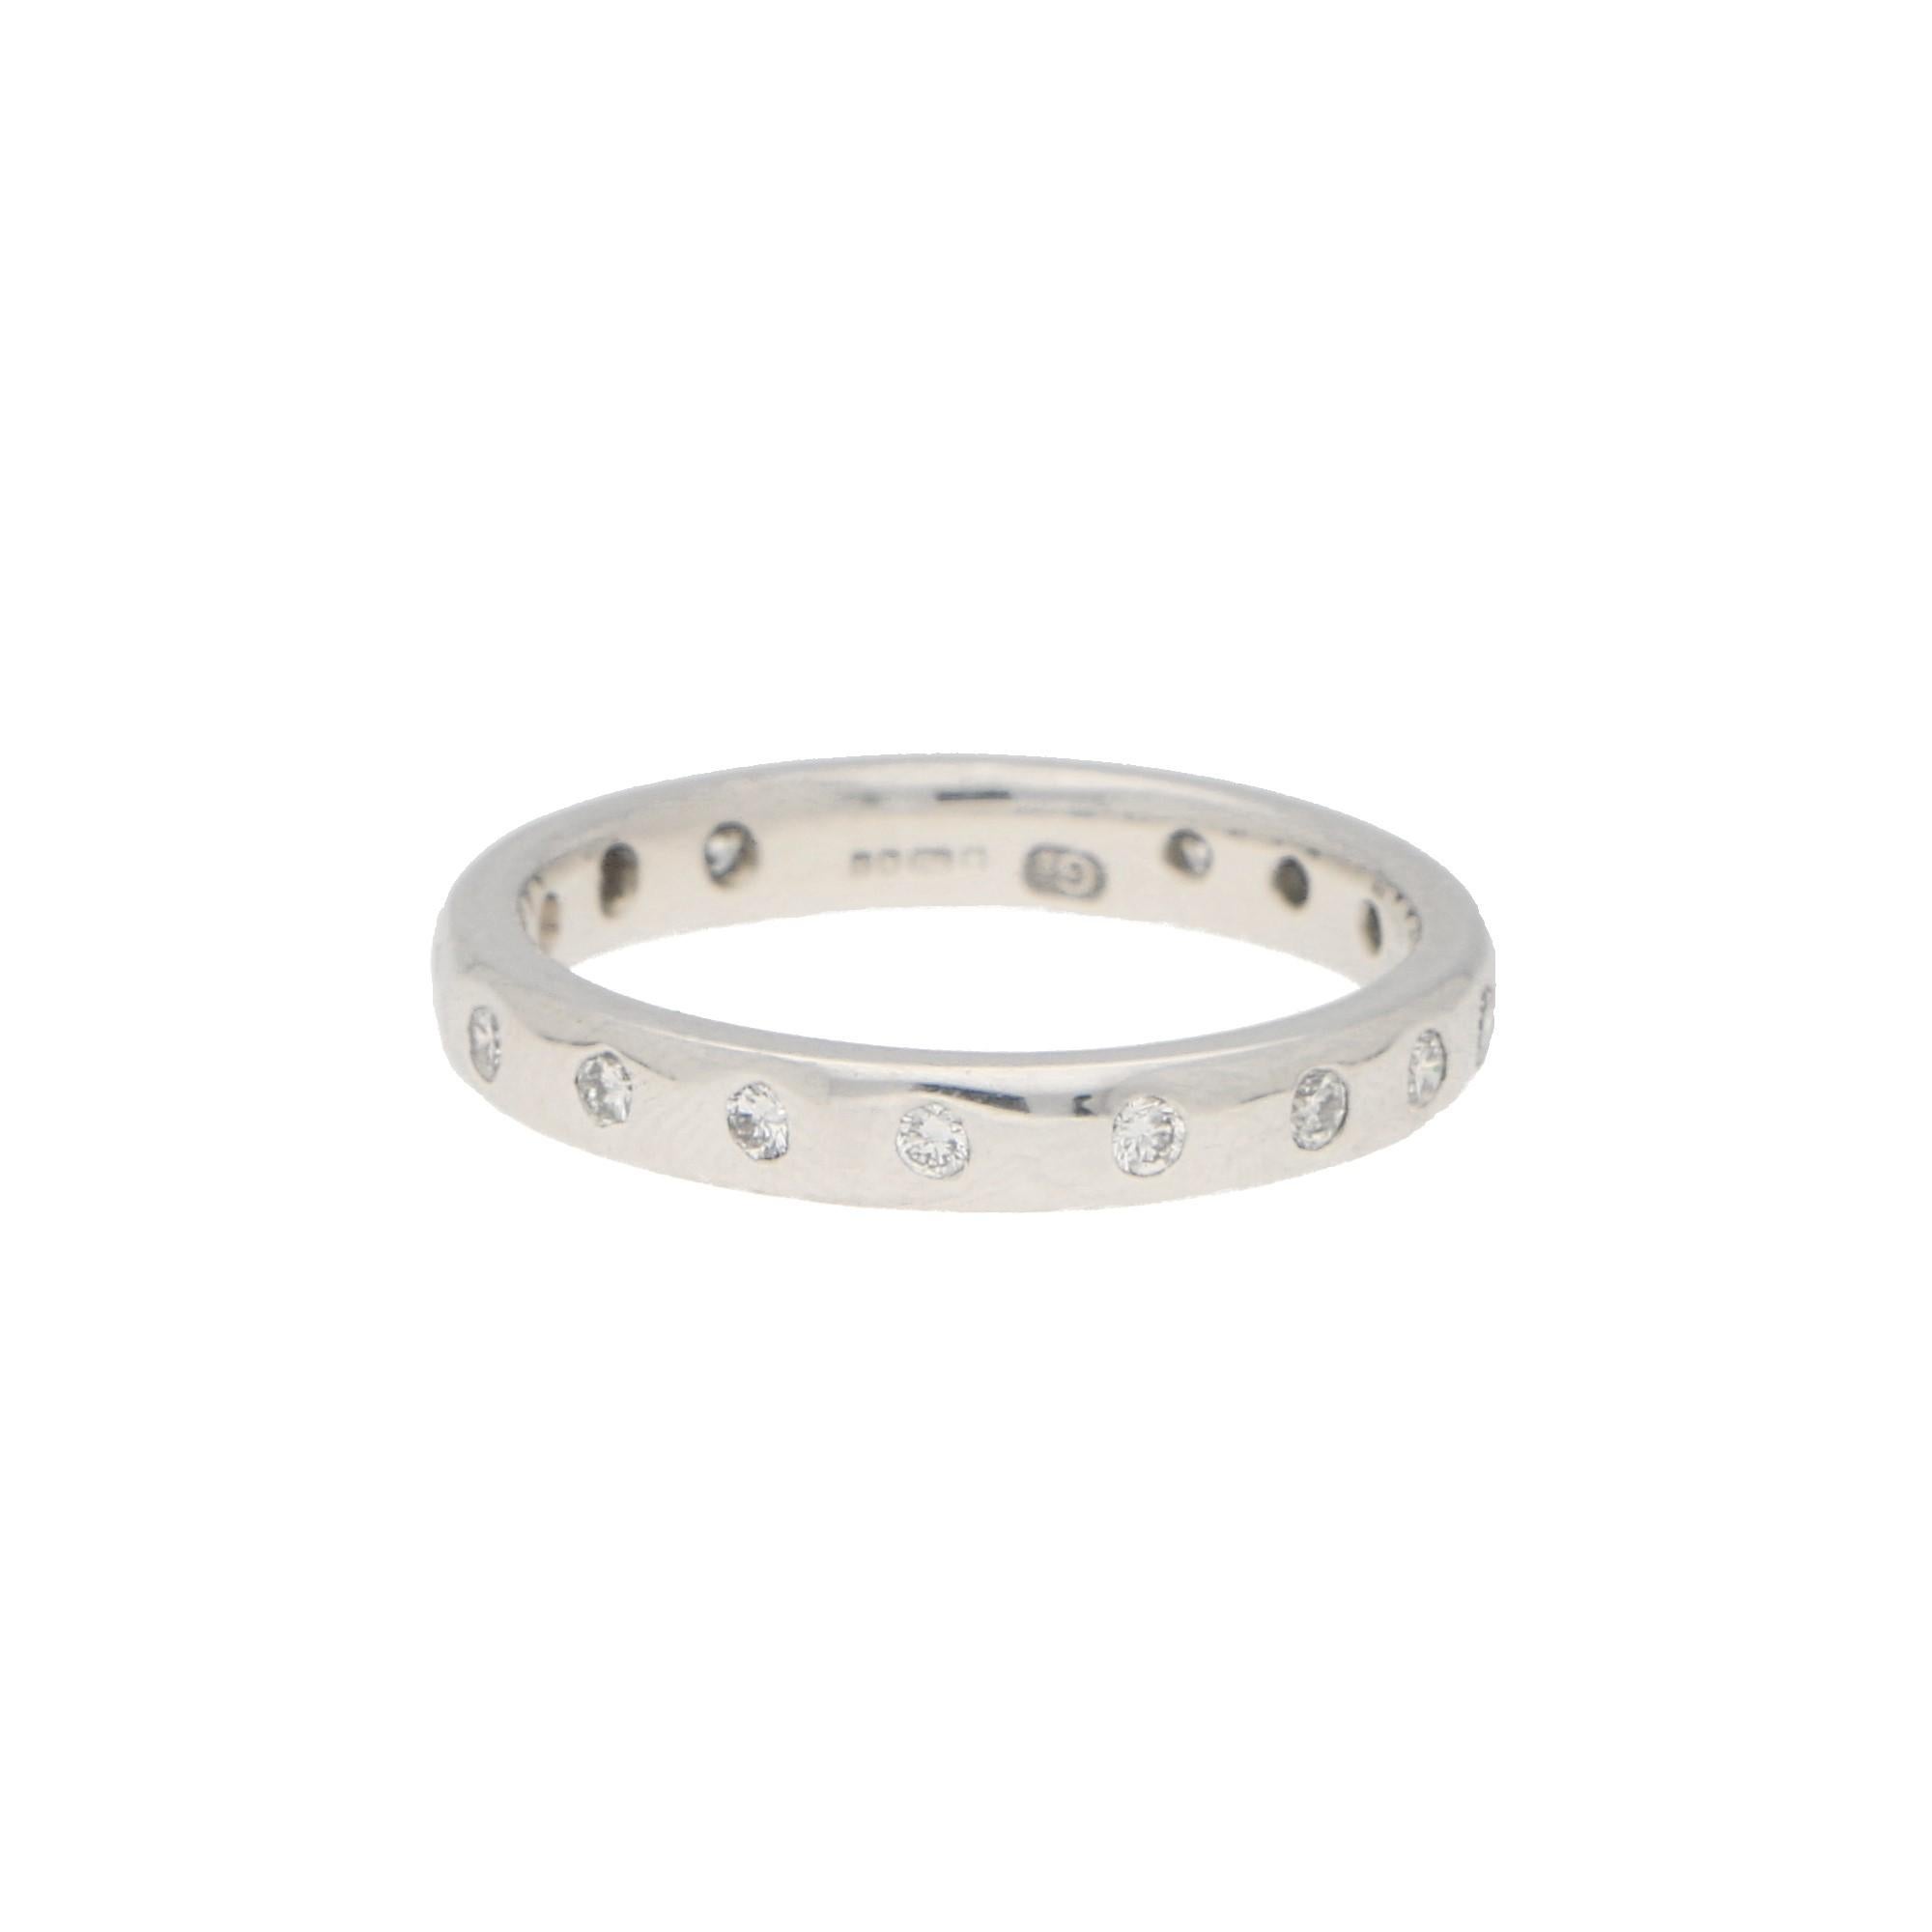 A beautiful diamond full eternity ring set in 18k white gold. 

The ring is composed of 16 round brilliant cut diamonds perfectly rubover set within a 3mm white gold band.

Total diamond weight is approximately 0.25 carats, estimated as G/H in